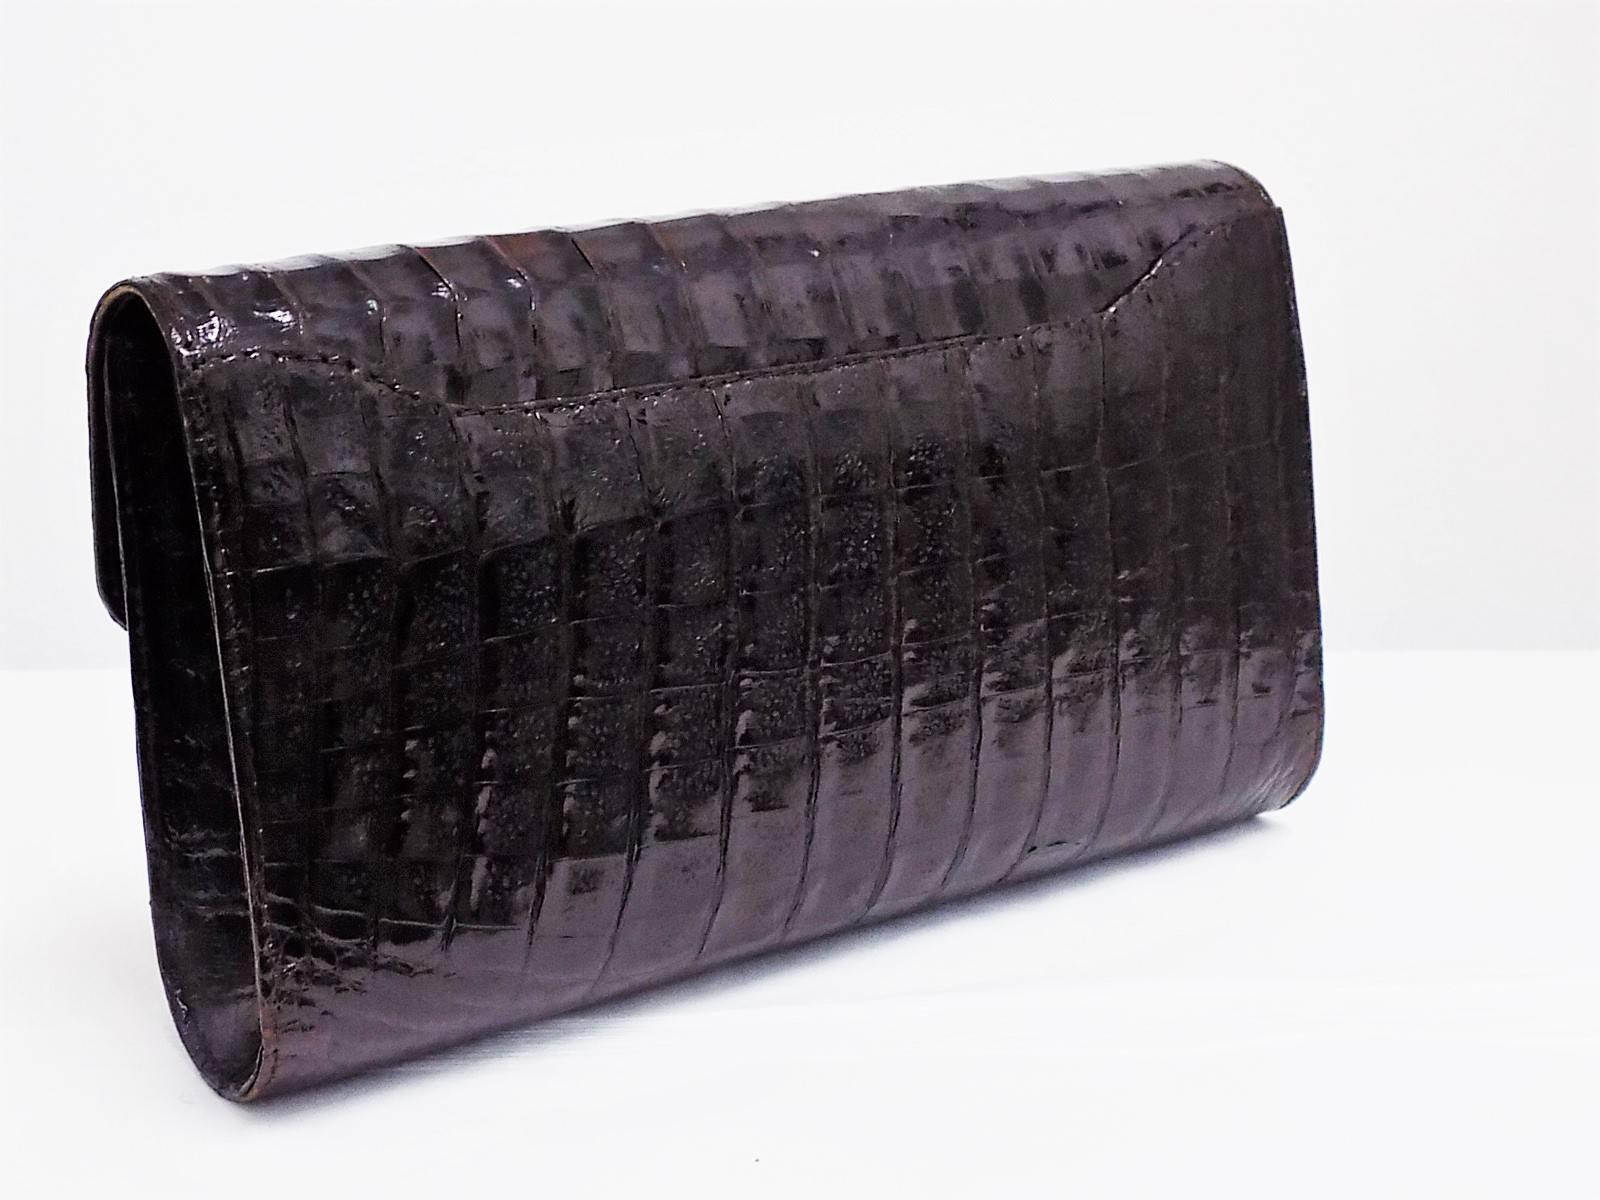 Amazing Vintage Valentino Garavani Chocolate Brown  Alligator  Clutch/ Shoulder Bag . Pristine condition . Beautiful luster and perfect shape!. Removable shoulder strap . Small Valentino logo  at the front. Magnetic snap flap closure. Leather lined